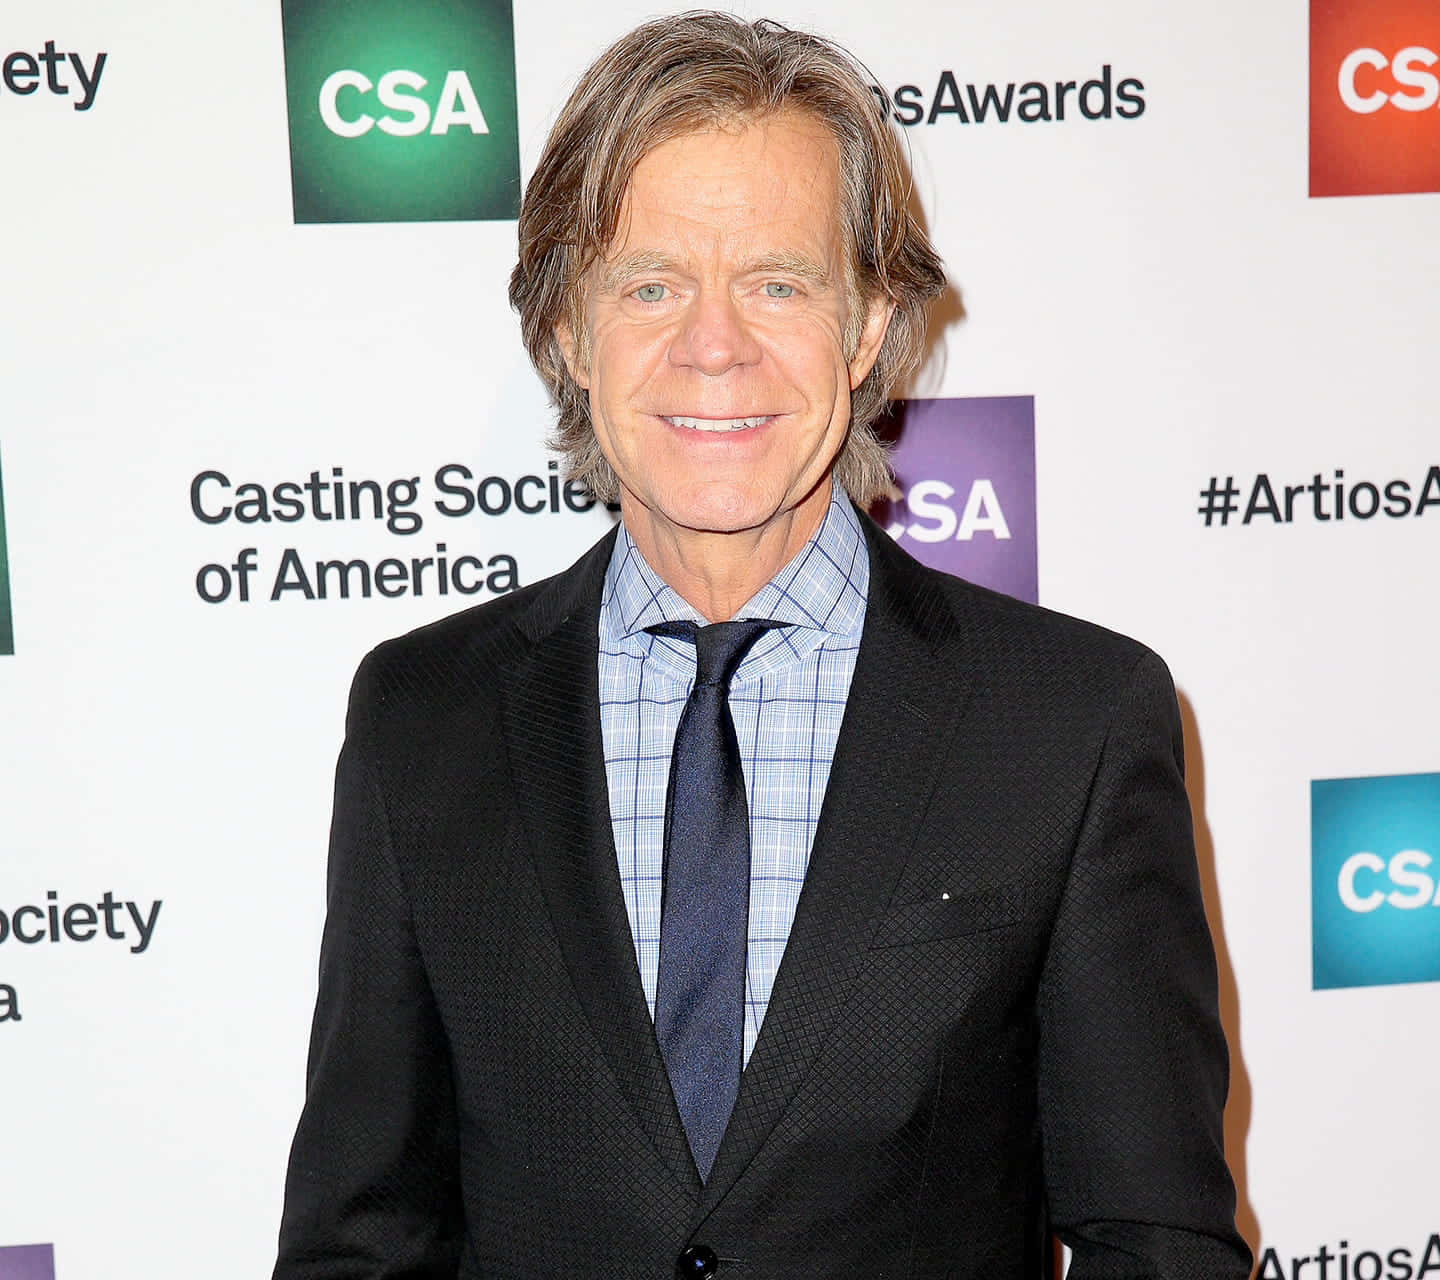 A Portrait Of William H. Macy, The Talented American Actor And Director